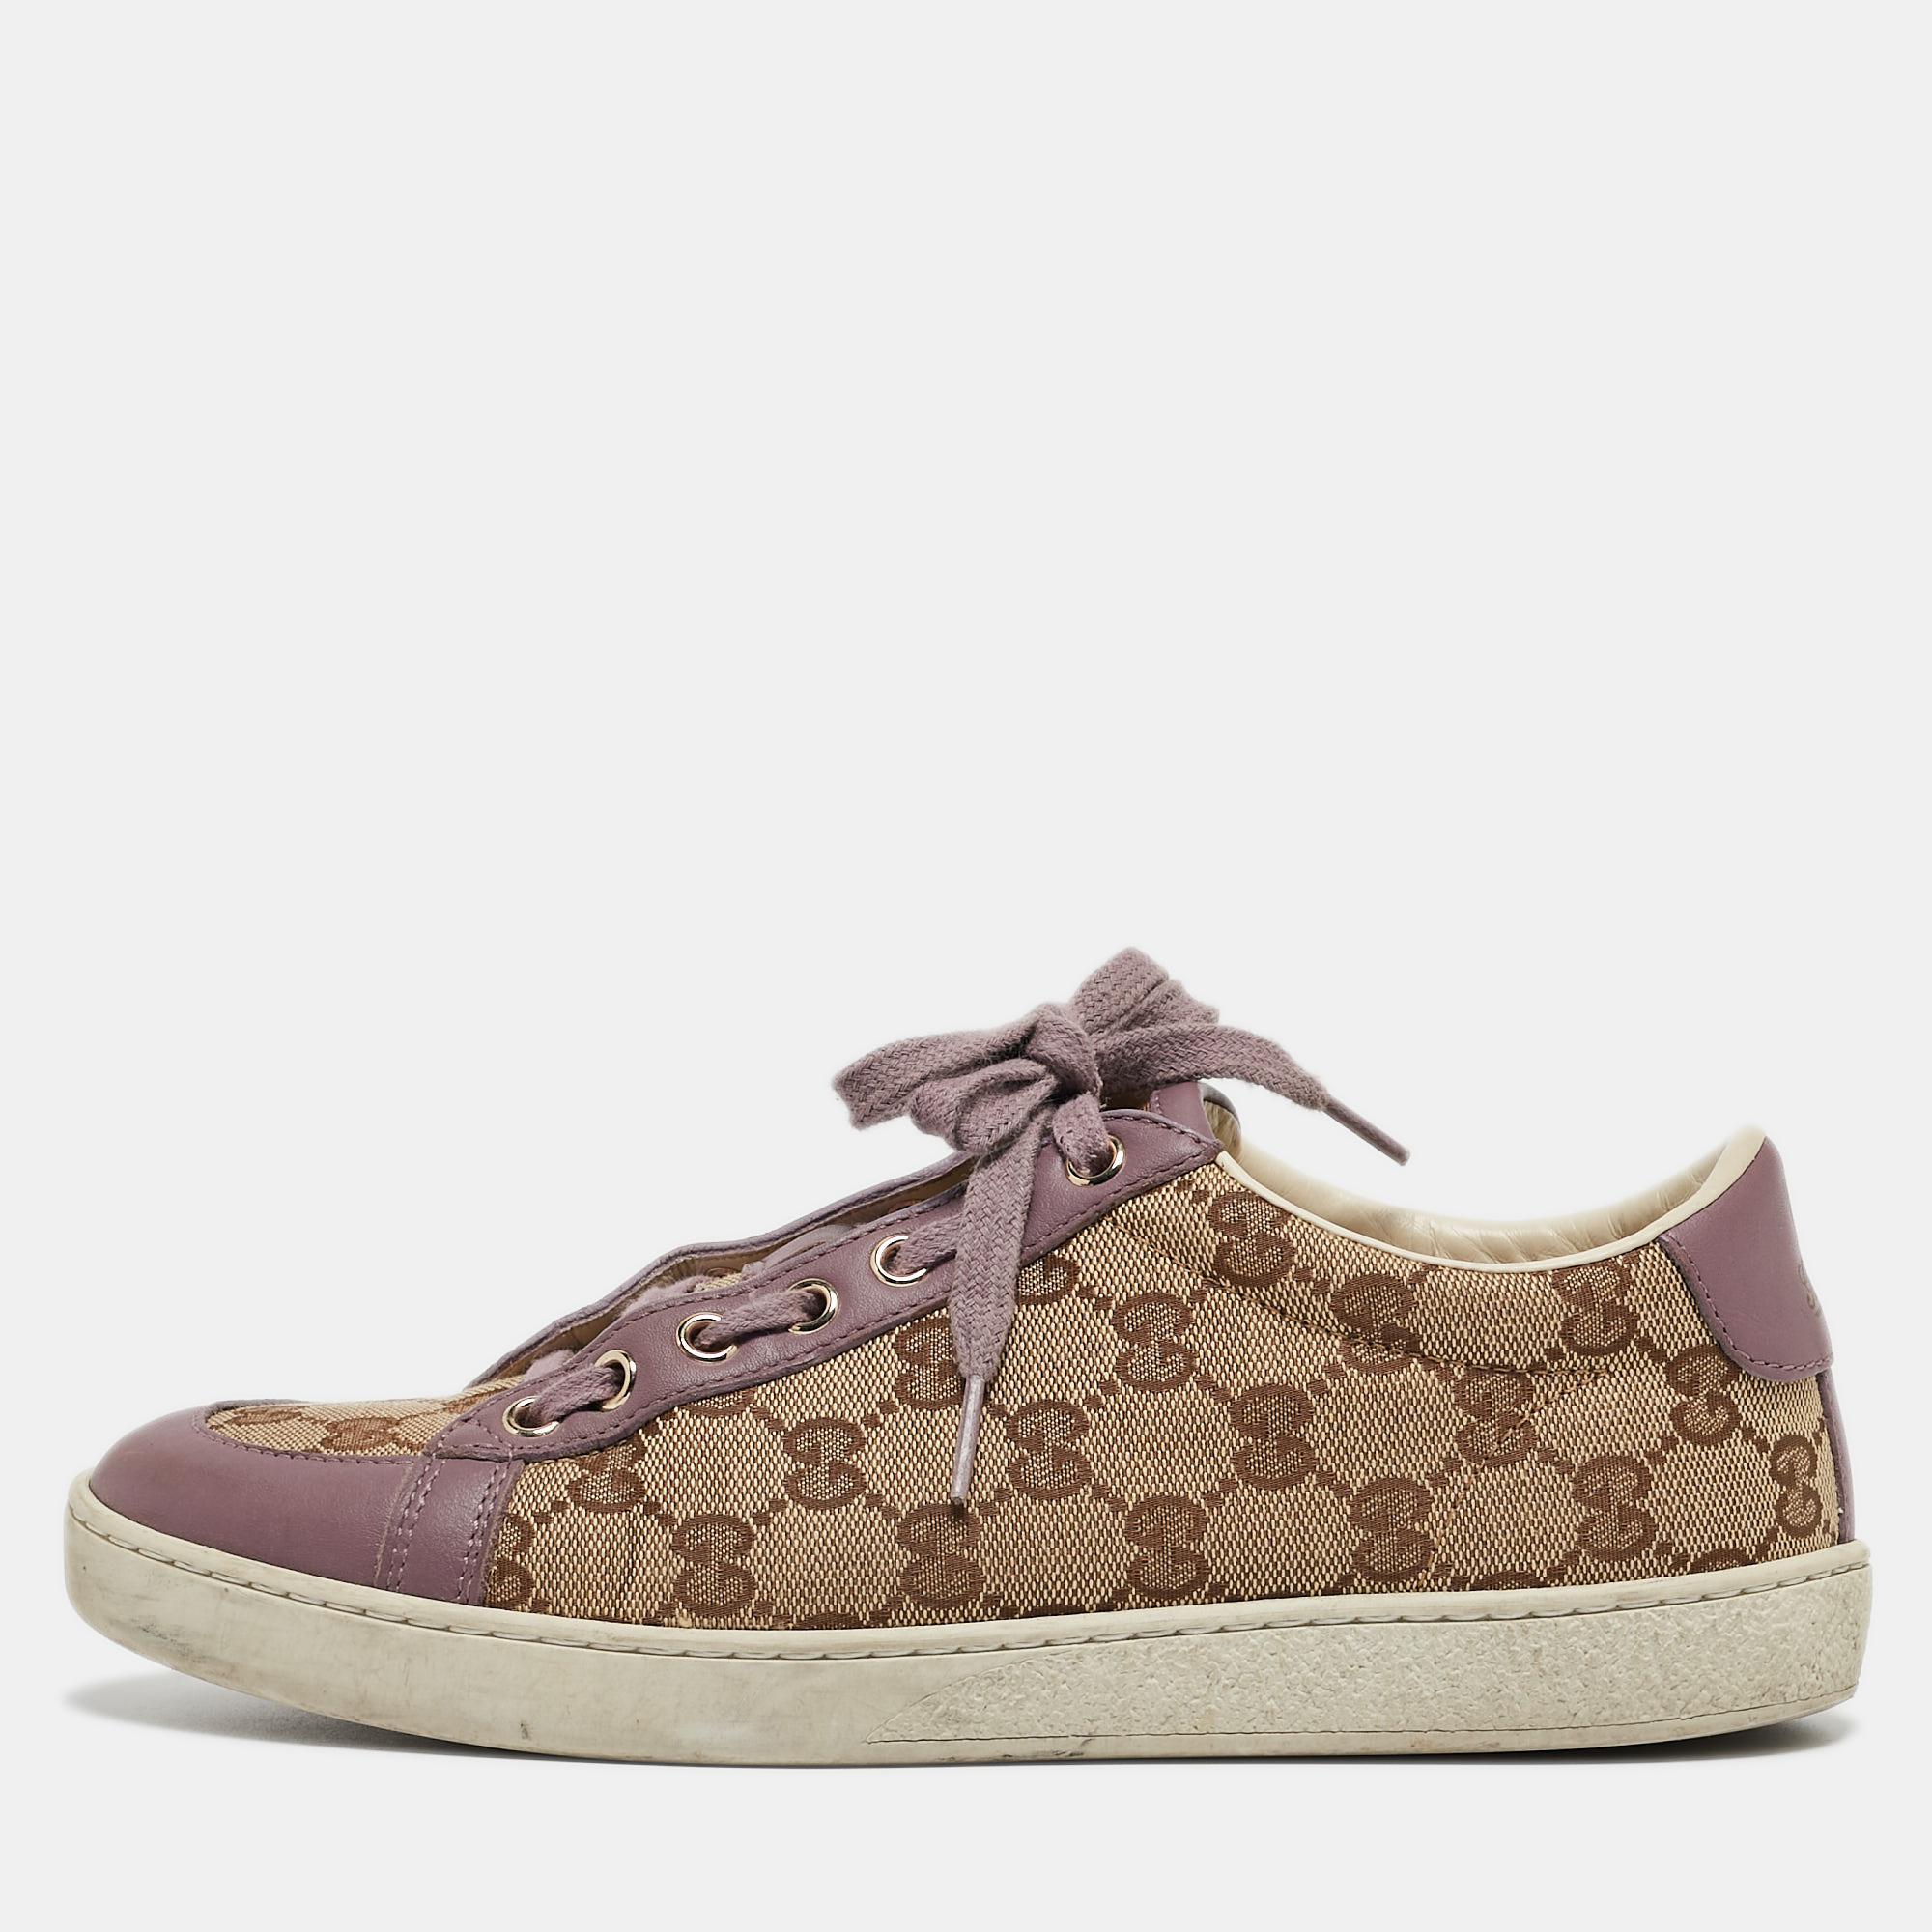 Step into fashion forward luxury with these Gucci sneakers. These premium kicks offer a harmonious blend of style and comfort perfect for those who demand sophistication in every step.